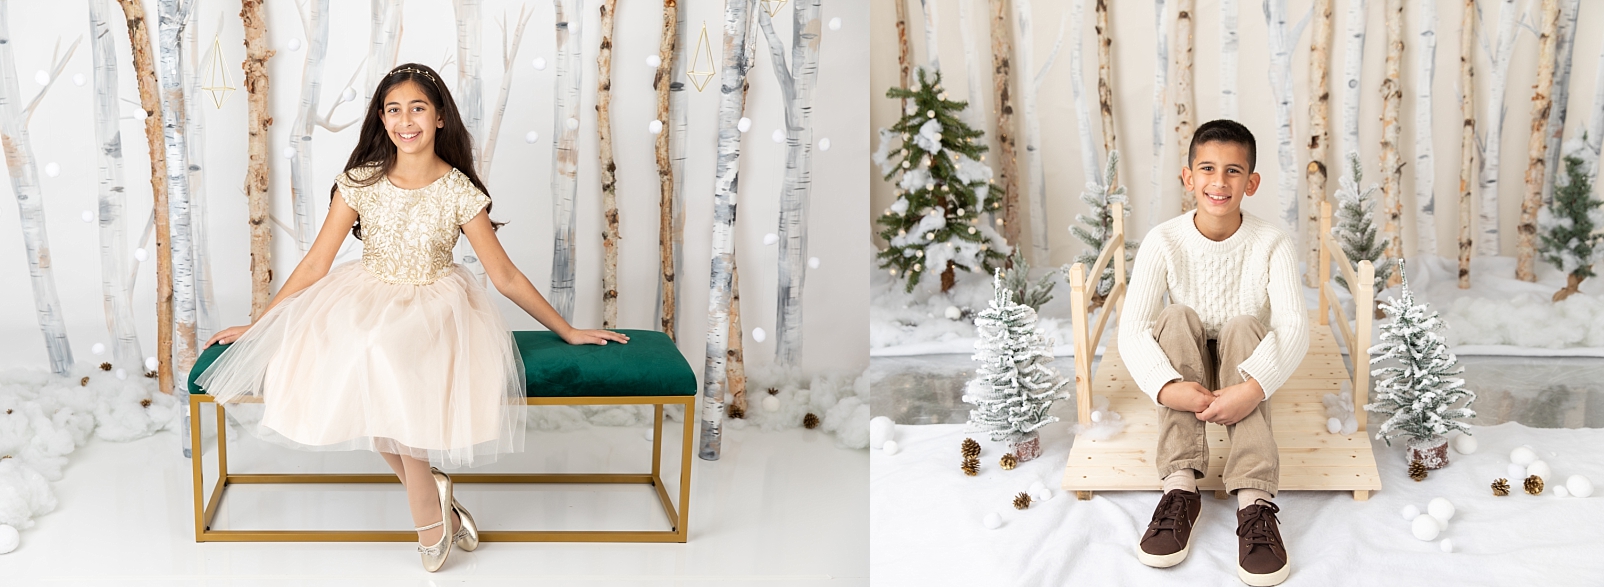 boy sitting on a bridge and girl sitting on a green velvet bench in front of birch trees and snowballs for Christmas Studio Minis Maryland